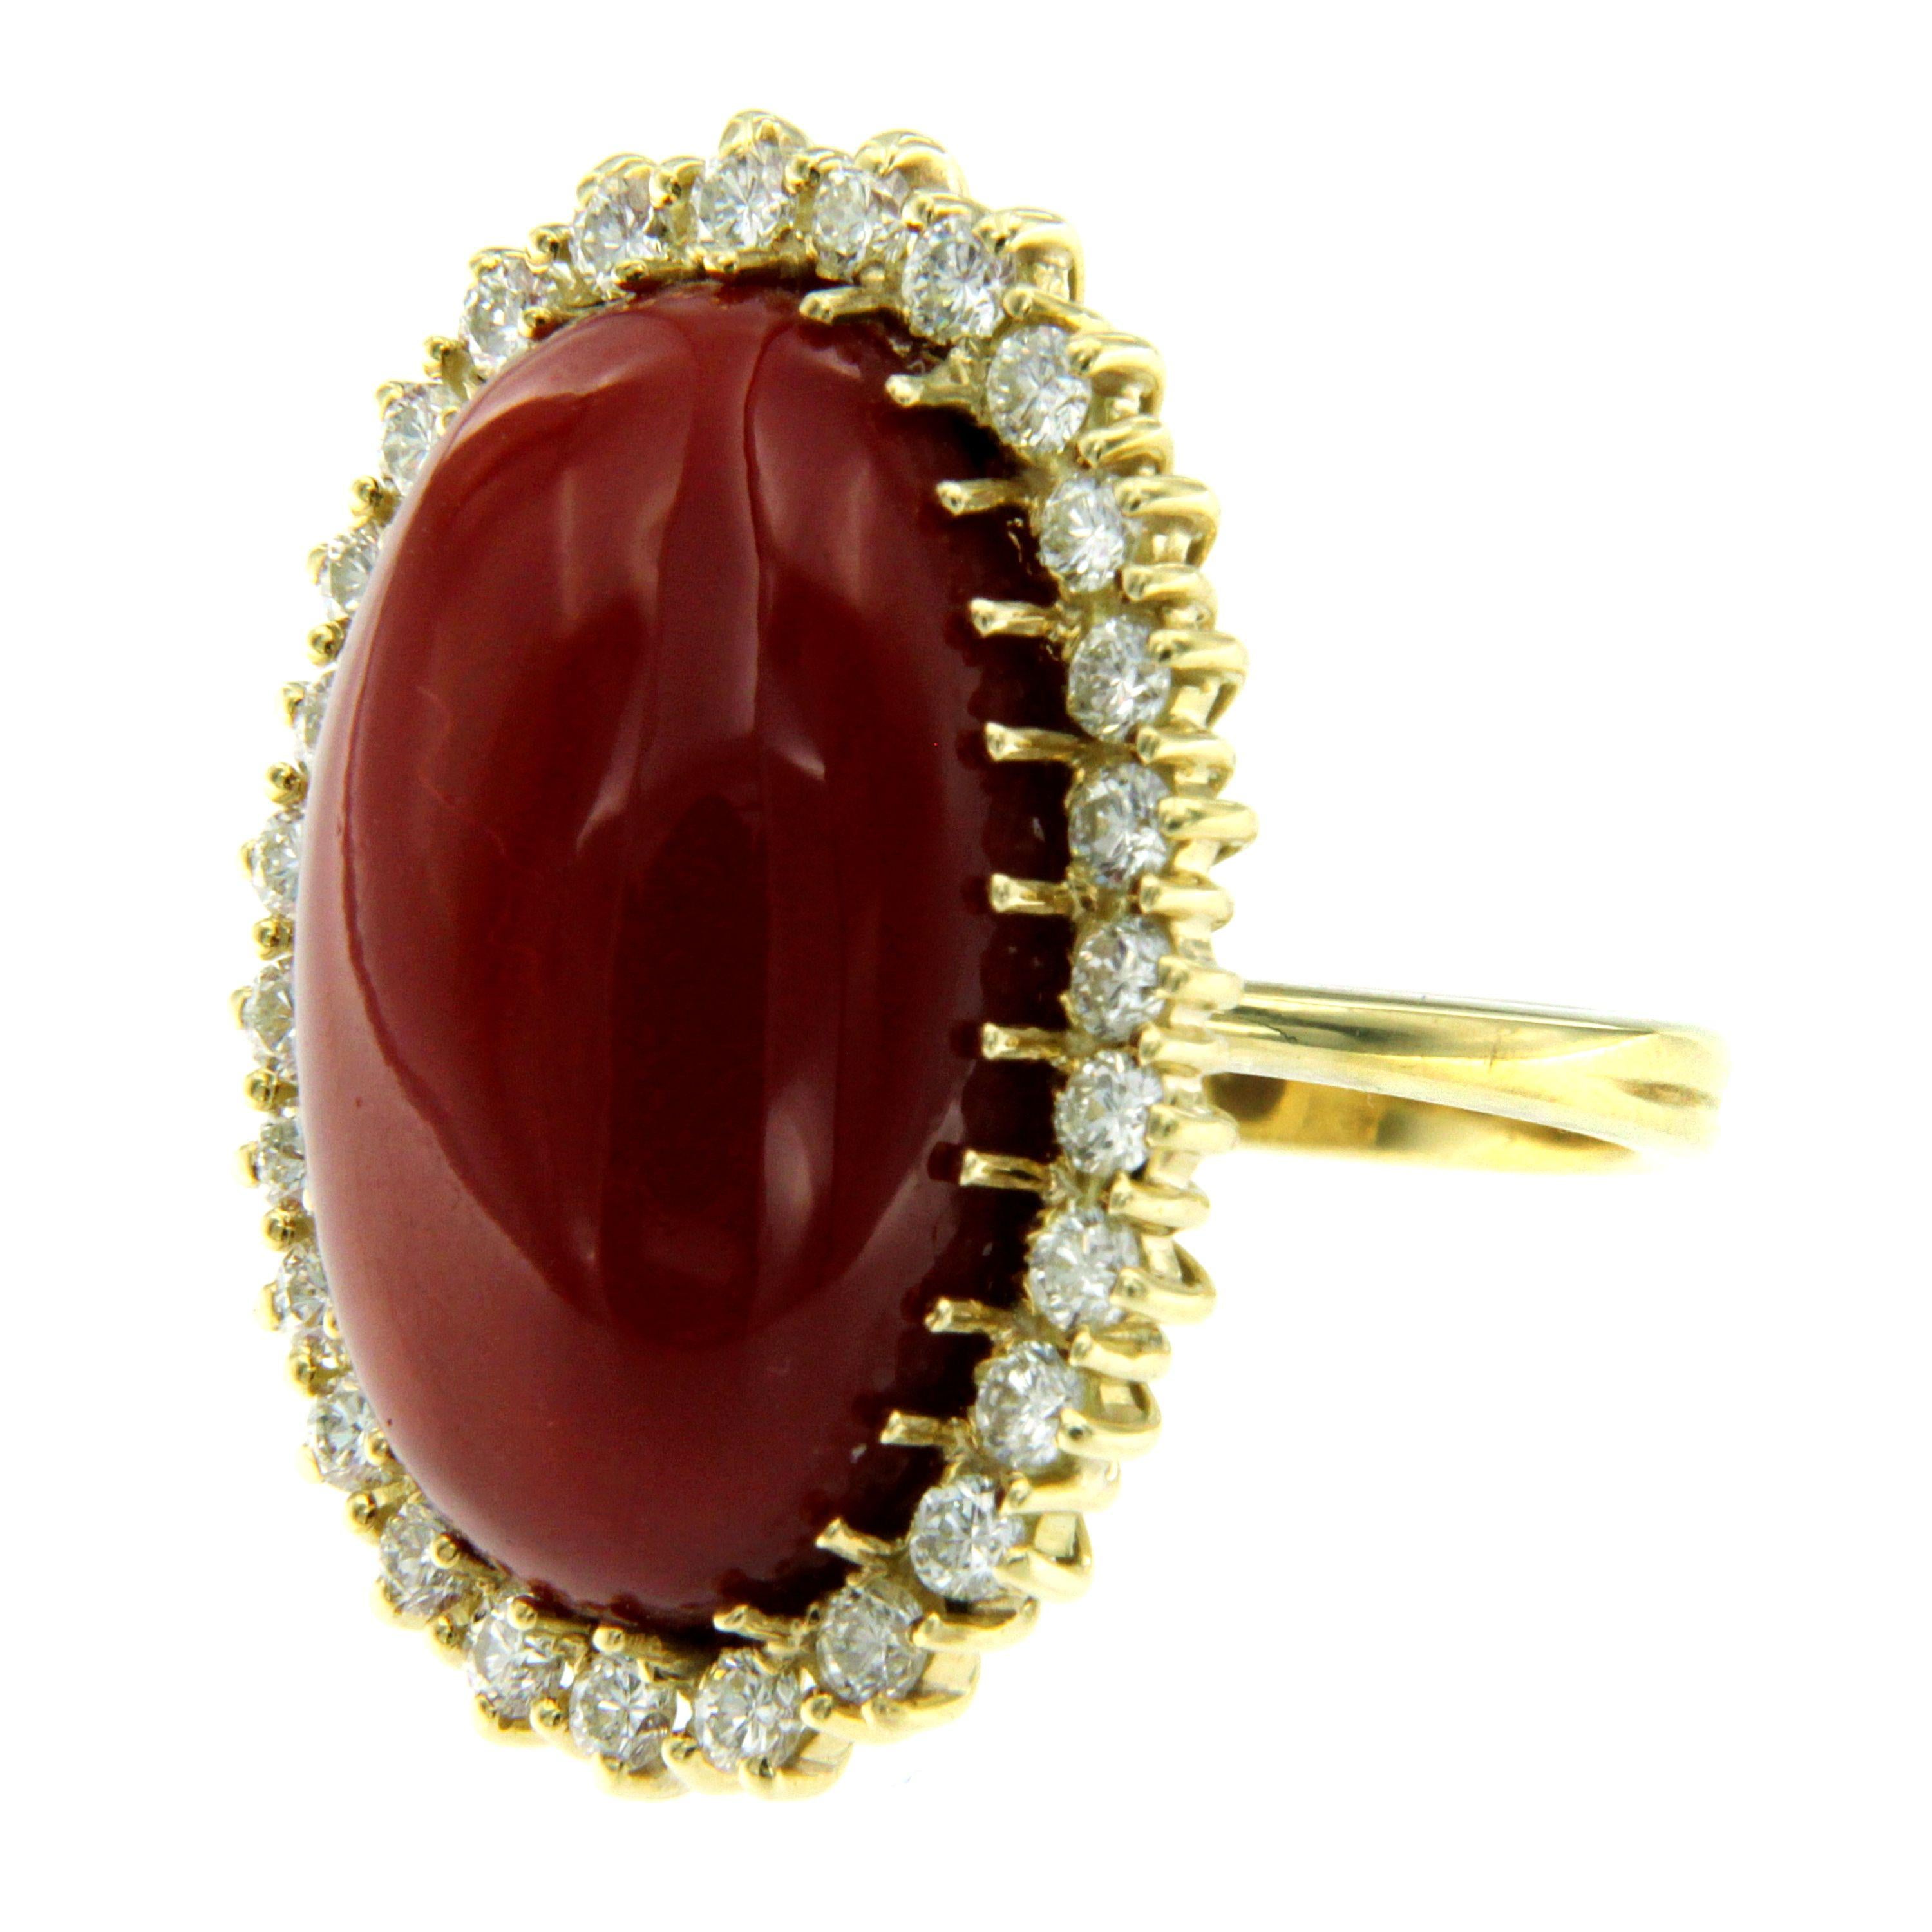 Beautiful Retro Cocktail Ring mounted in 18k yellow gold set with a natural, of great quality, Oxblood Aka Coral 21,72 x 13,50 mm (4,00 g) and surrounded by 1,20 carat of Round brilliant cut diamonds graded F/G color Vvs clarity.
Made in Italy,